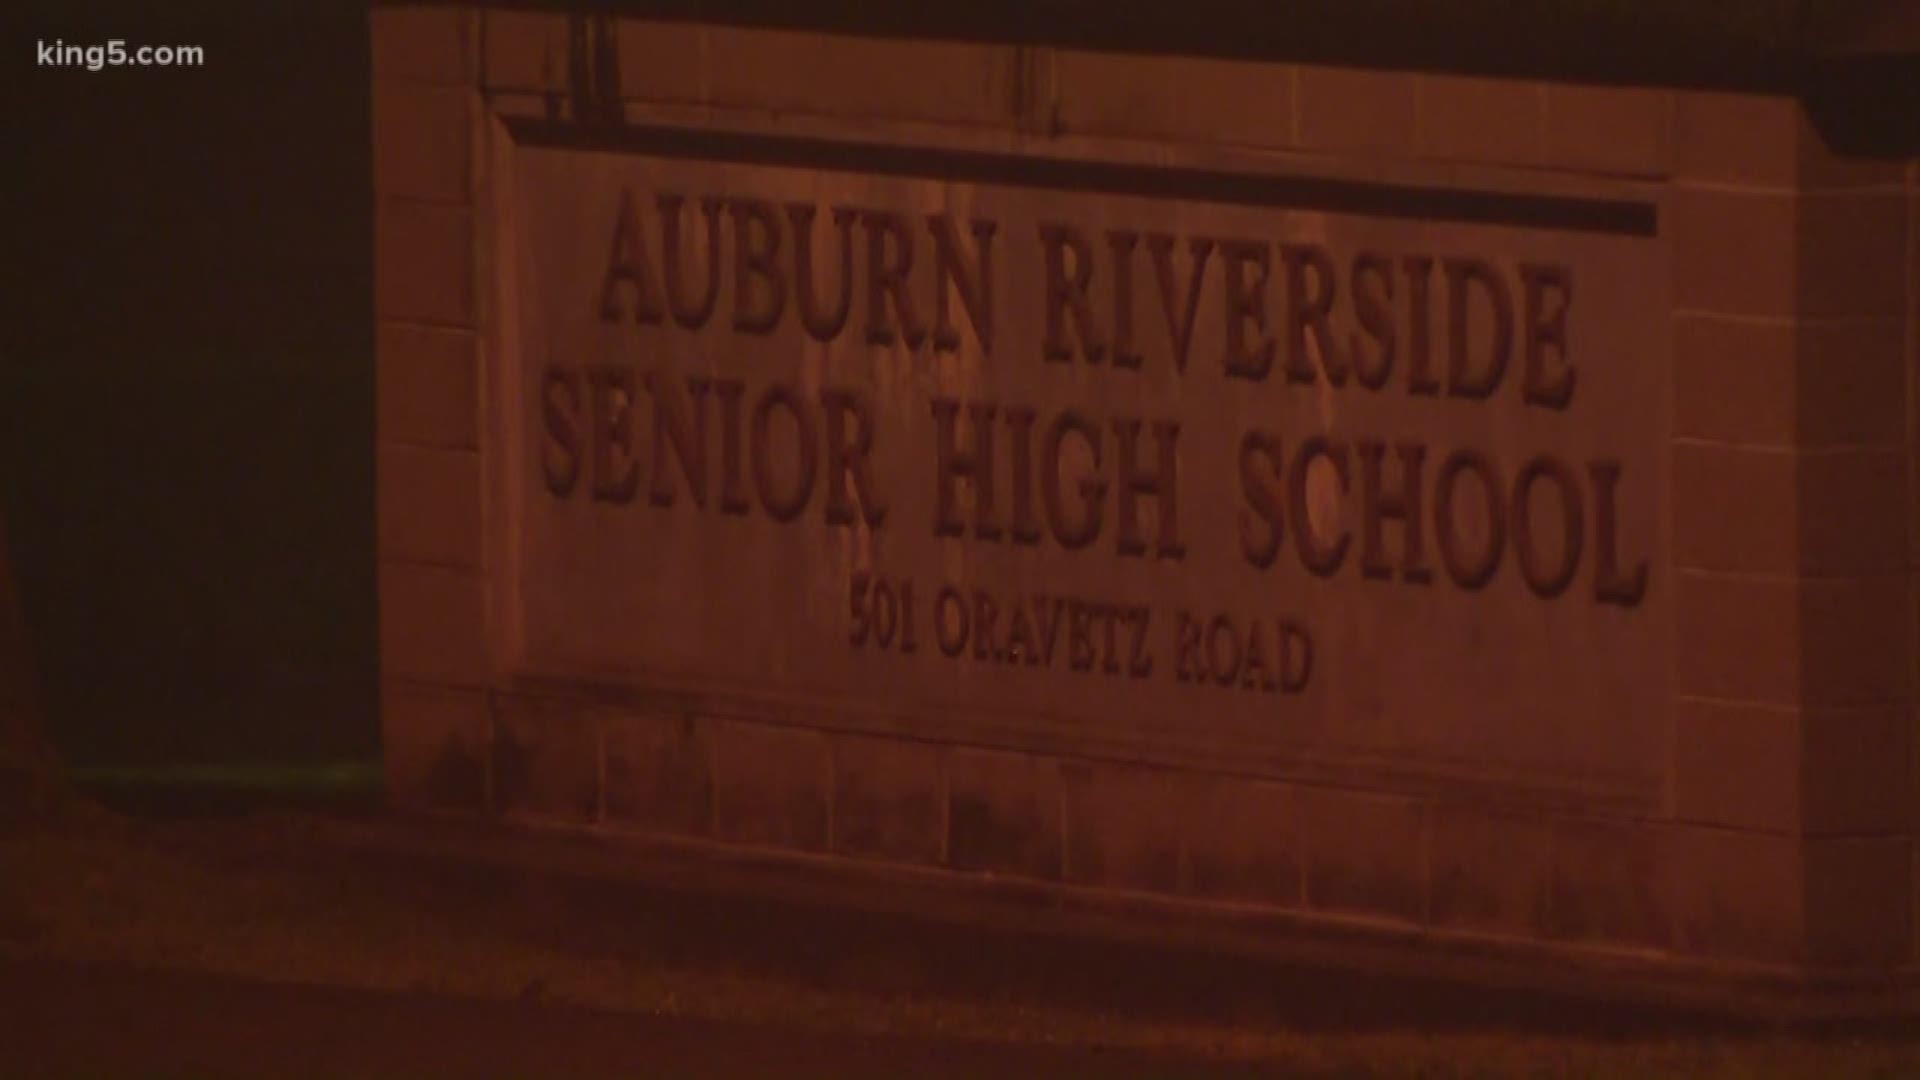 An Auburn teacher is on administrative leave after a video surfaced of the teacher allegedly trying to have an inappropriate relationship with a young teen.